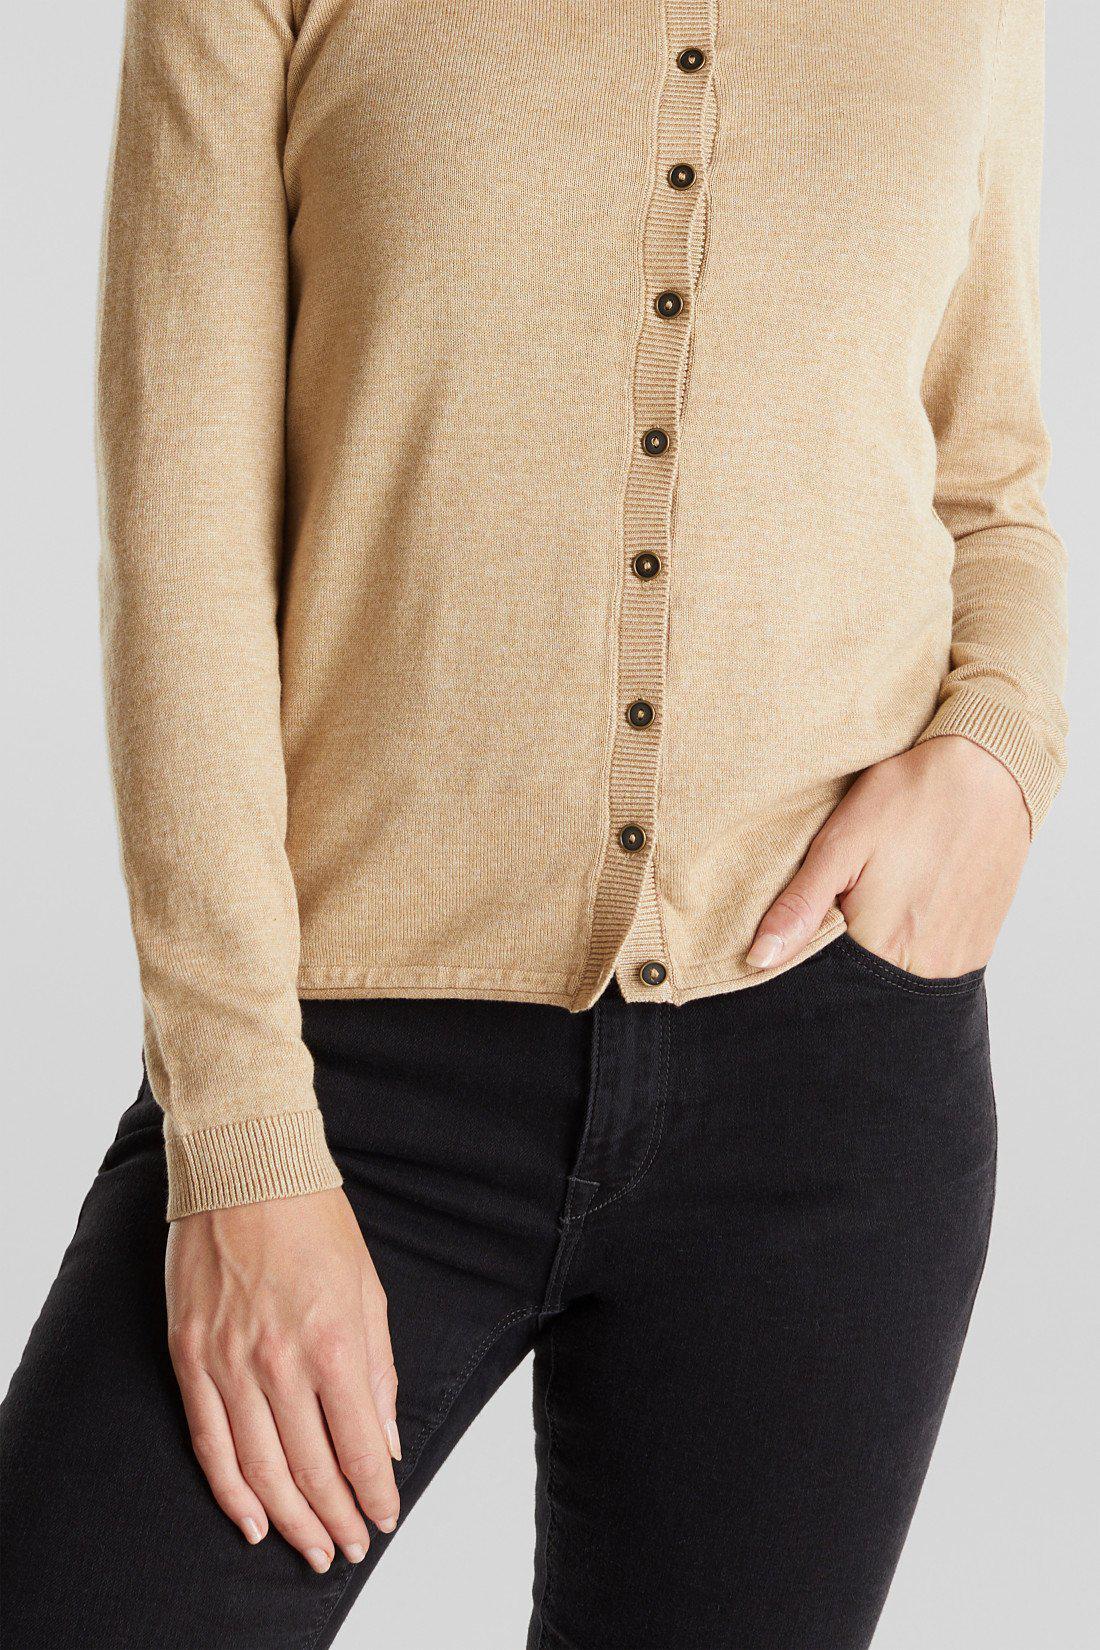 Oatmeal Button Up Sweater Cardigan